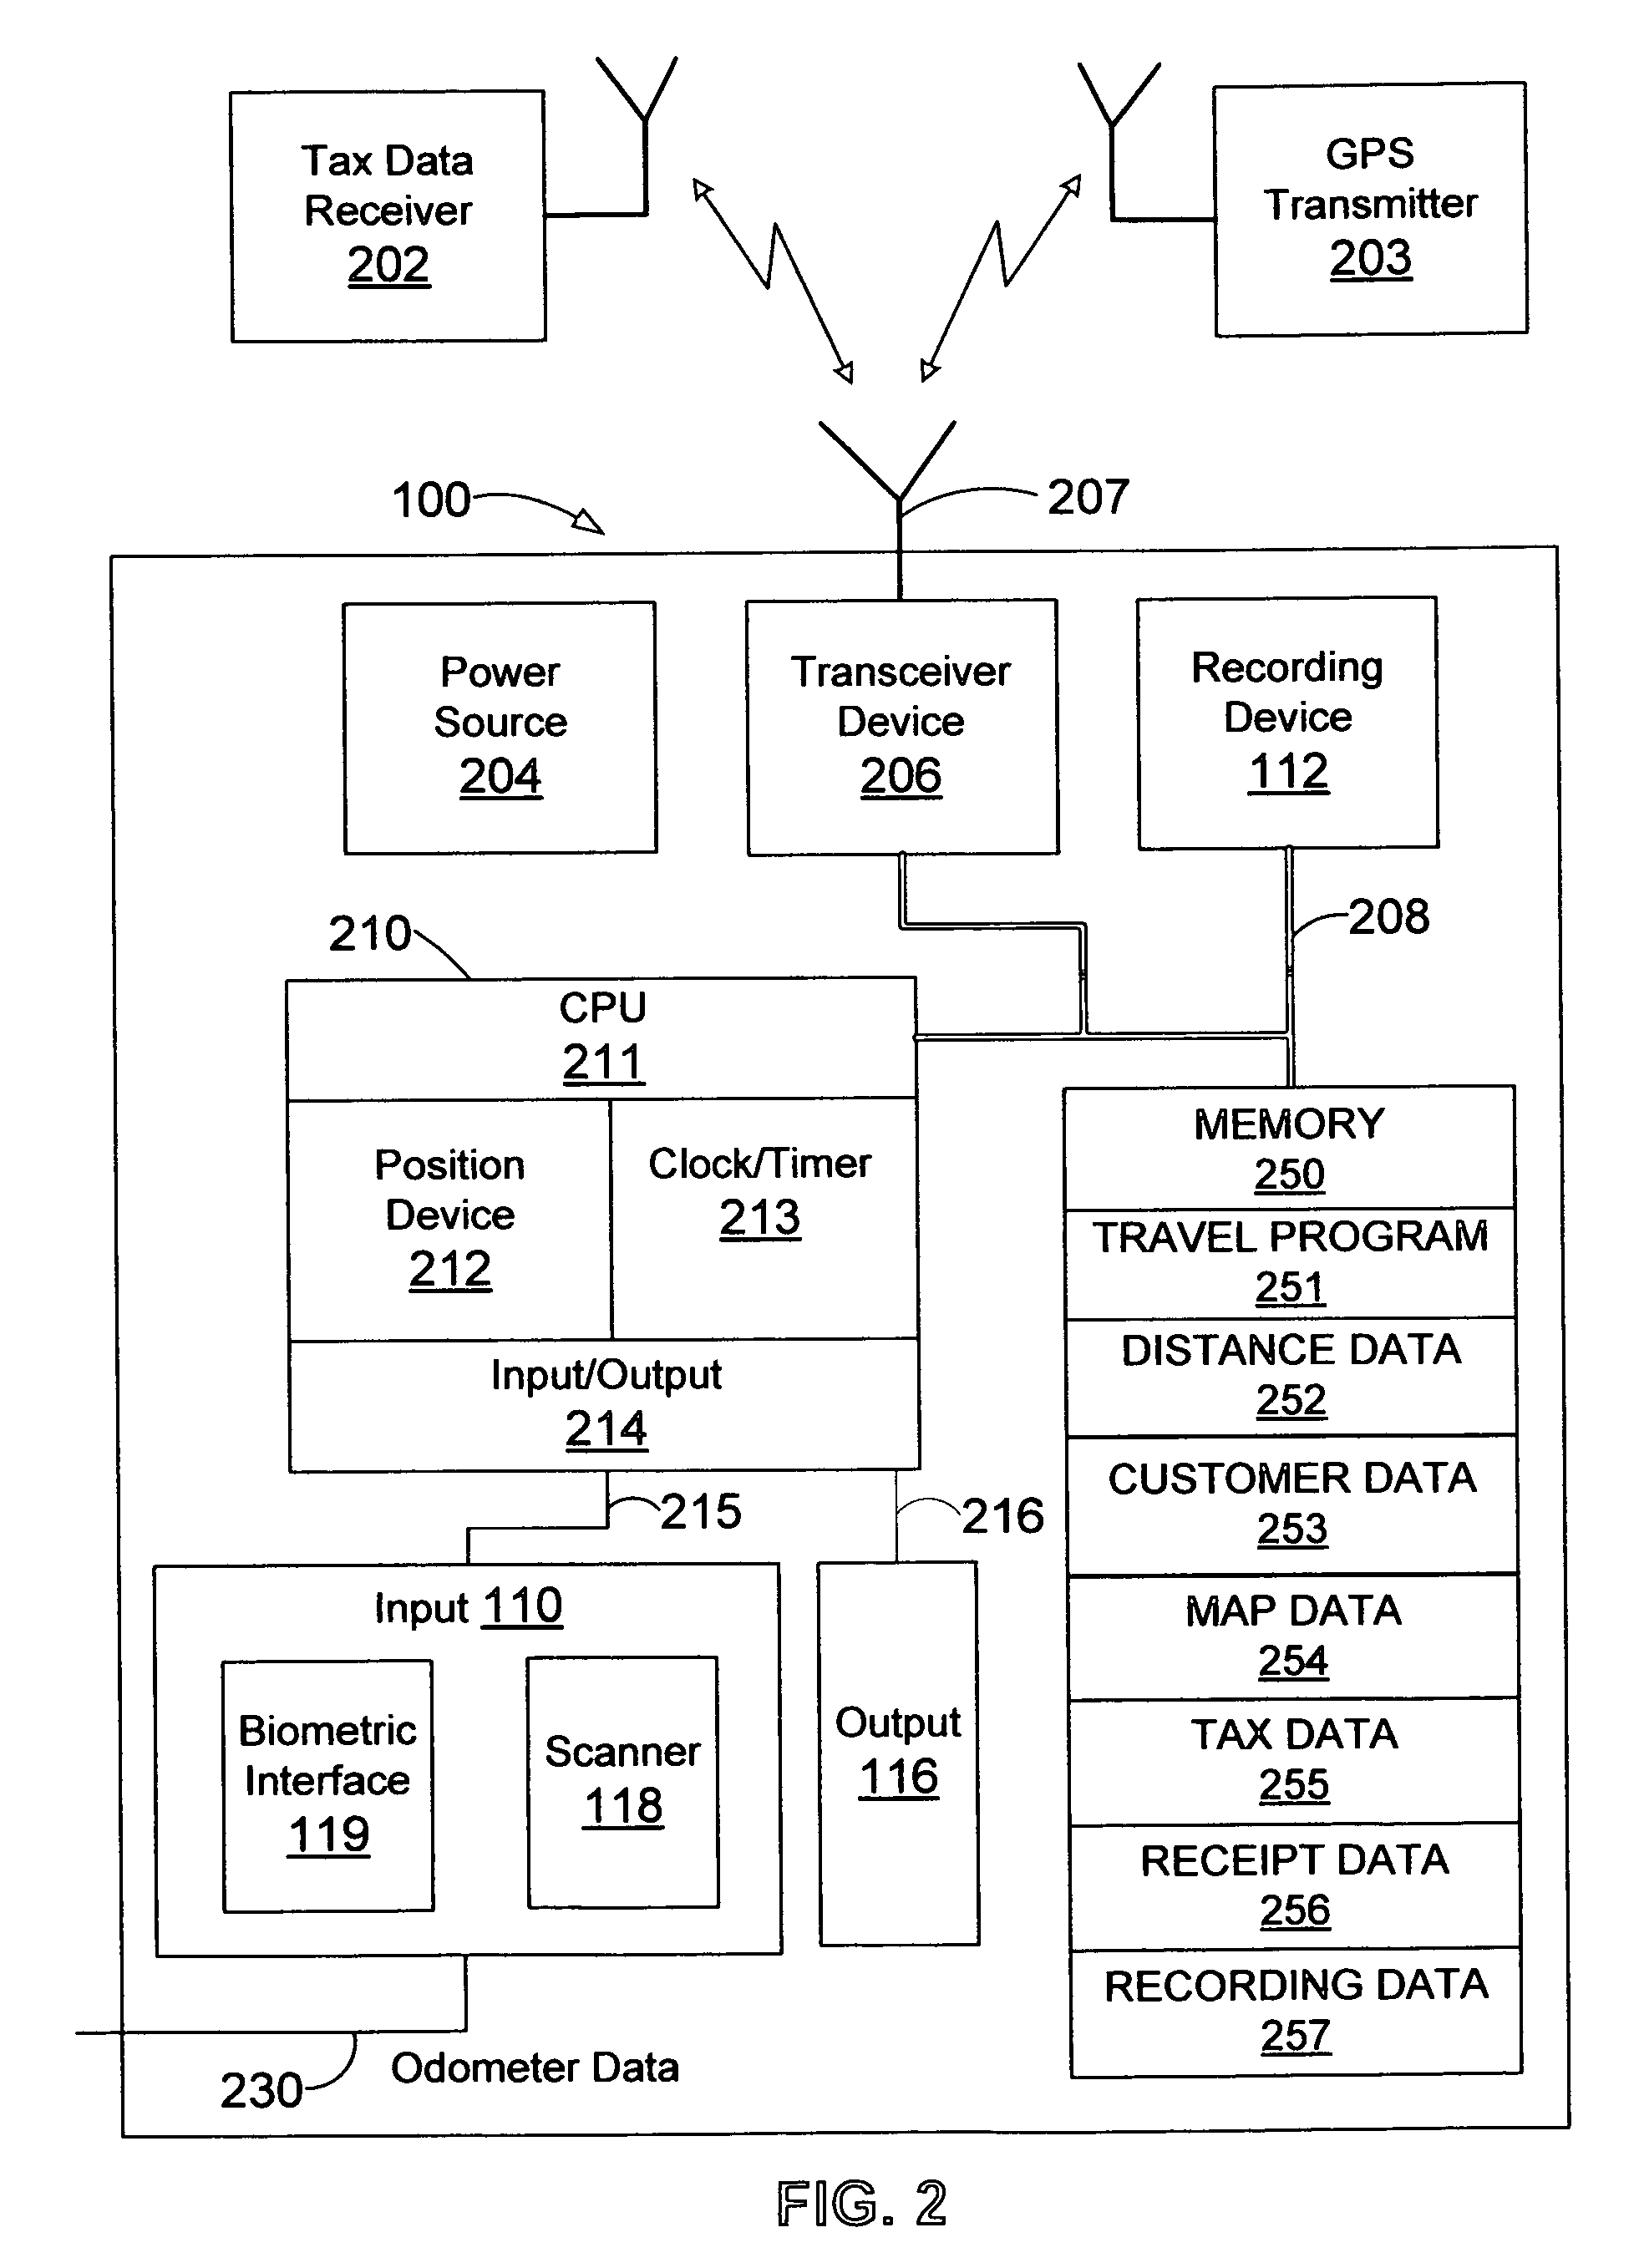 Apparatus and method for tracking vehicle travel and expenditures